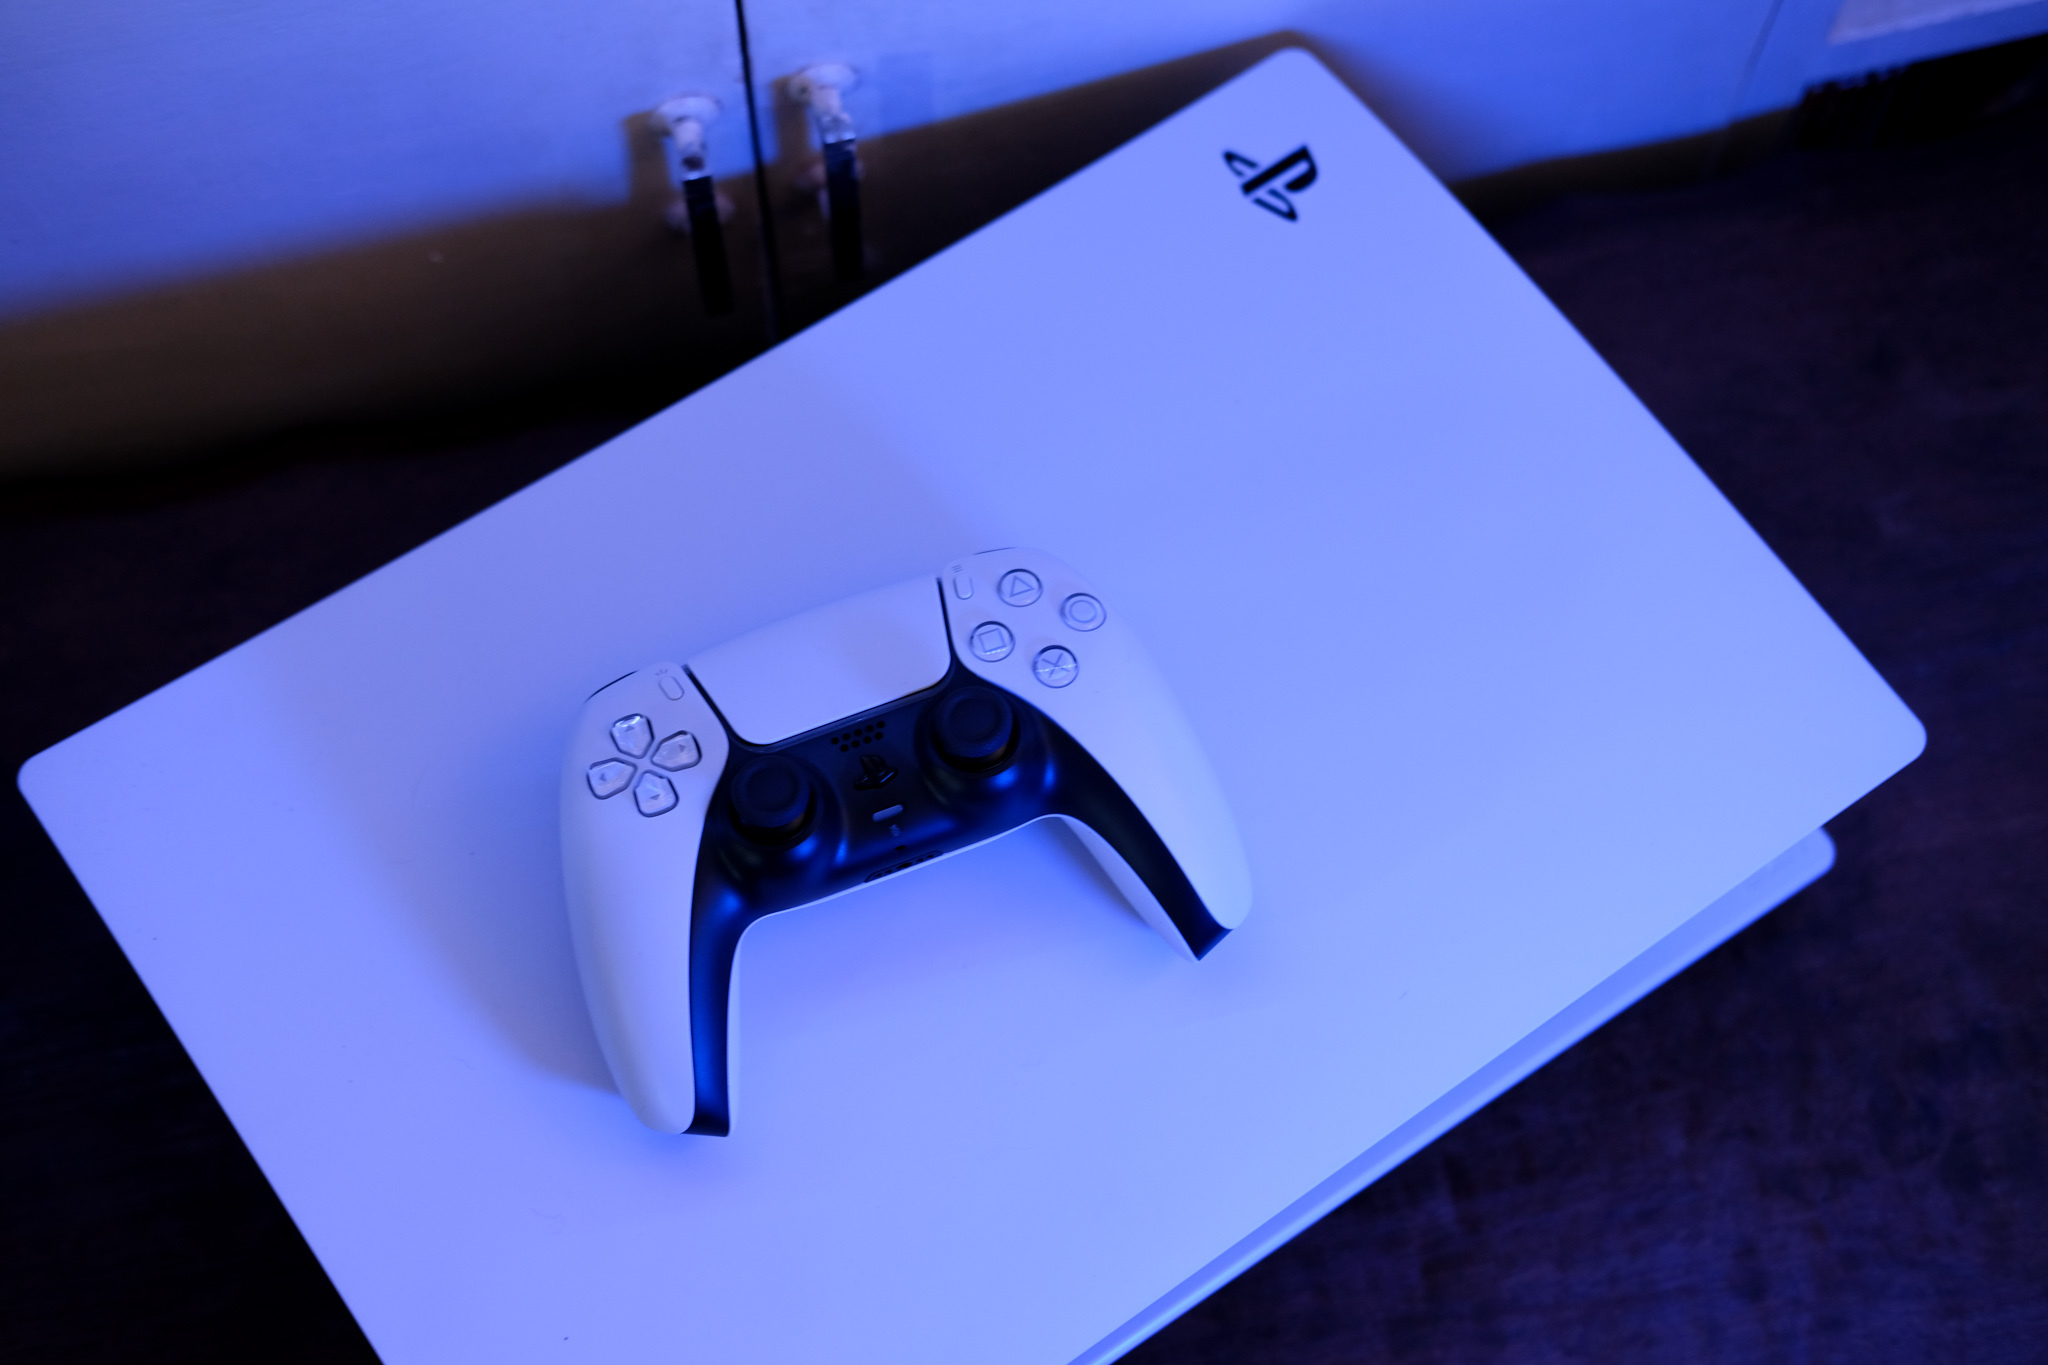 PS5 Unboxing: A closer look at the console and DualSense controller